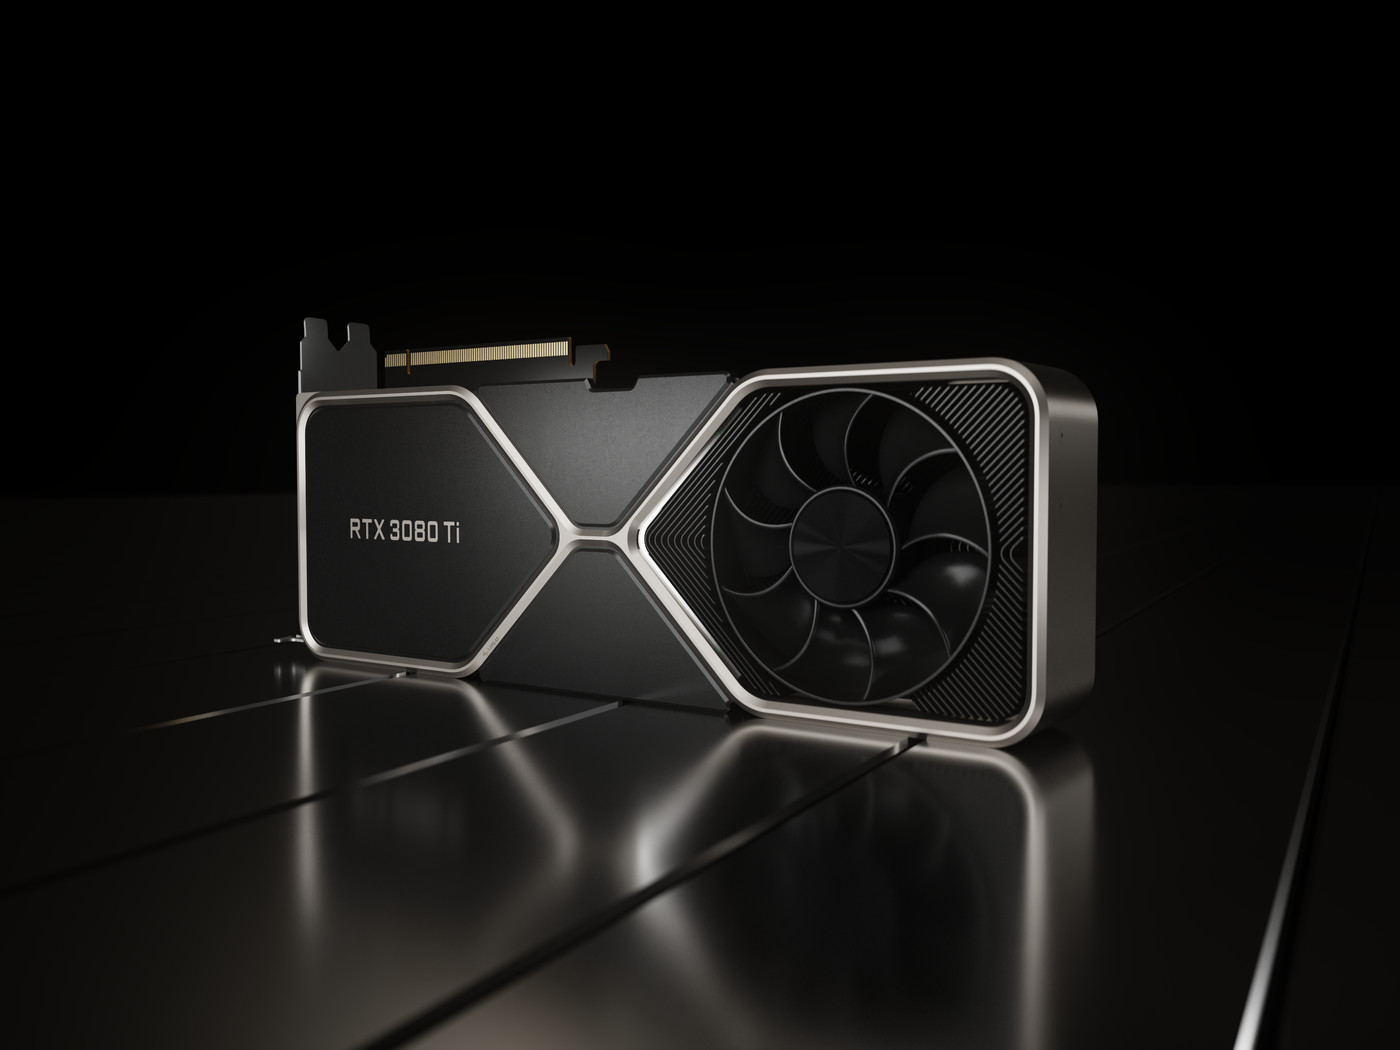 Nvidia GeForce RTX 3080 Ti: launching June 3rd for $199